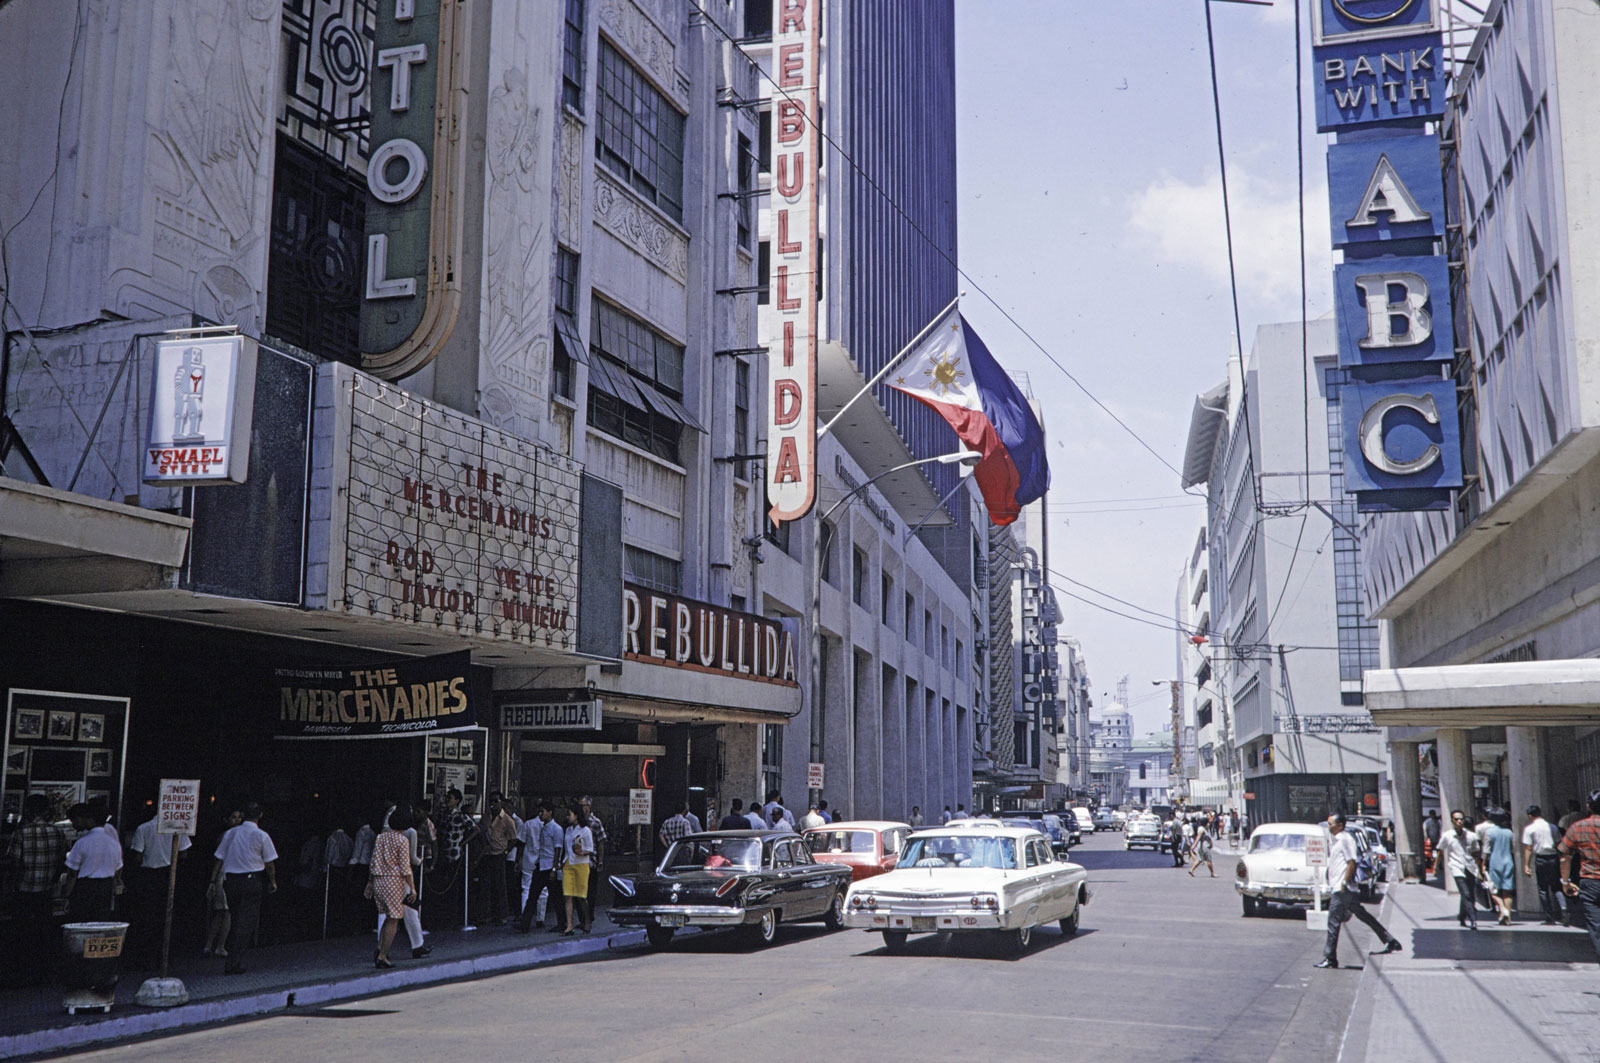 Escolta Street showing the Rebullida department store next to a movie theater.